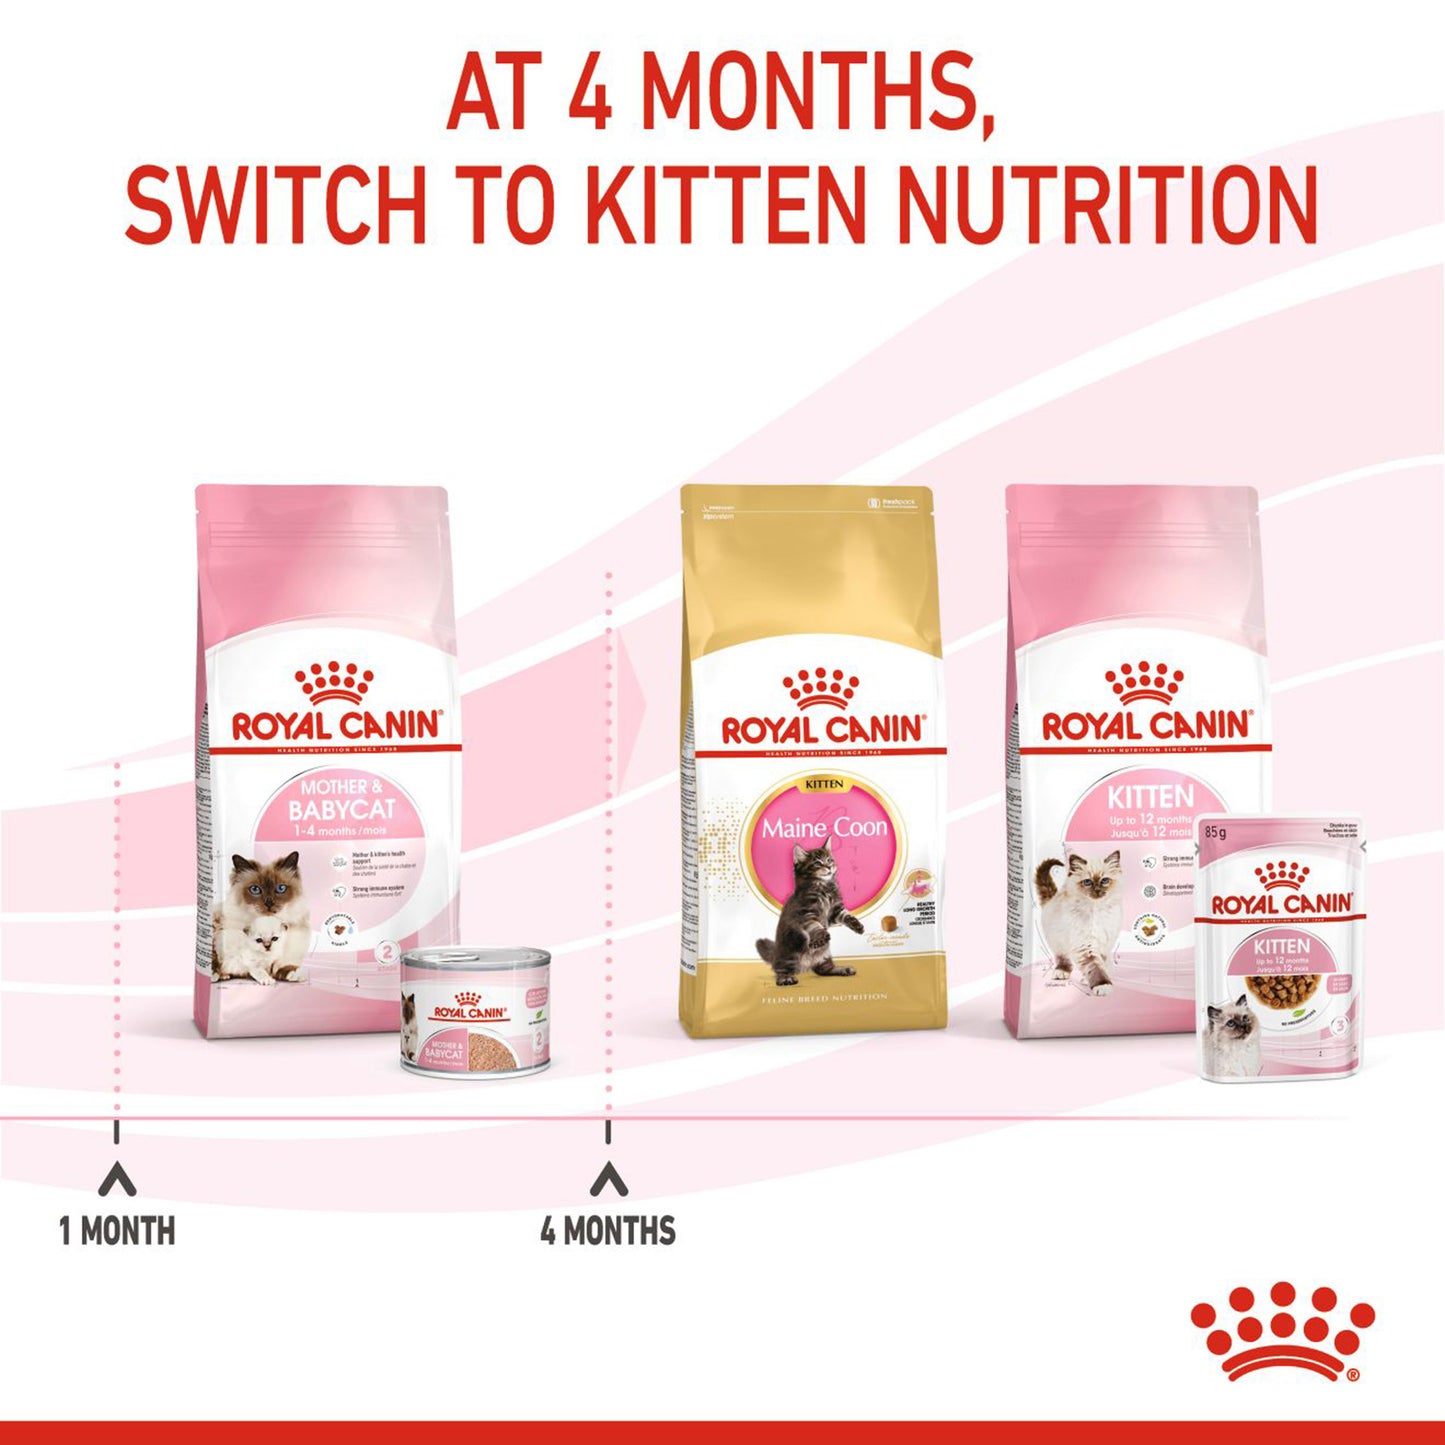 Royal Canin Mother And Babycat Dry Cat Food - Heads Up For Tails